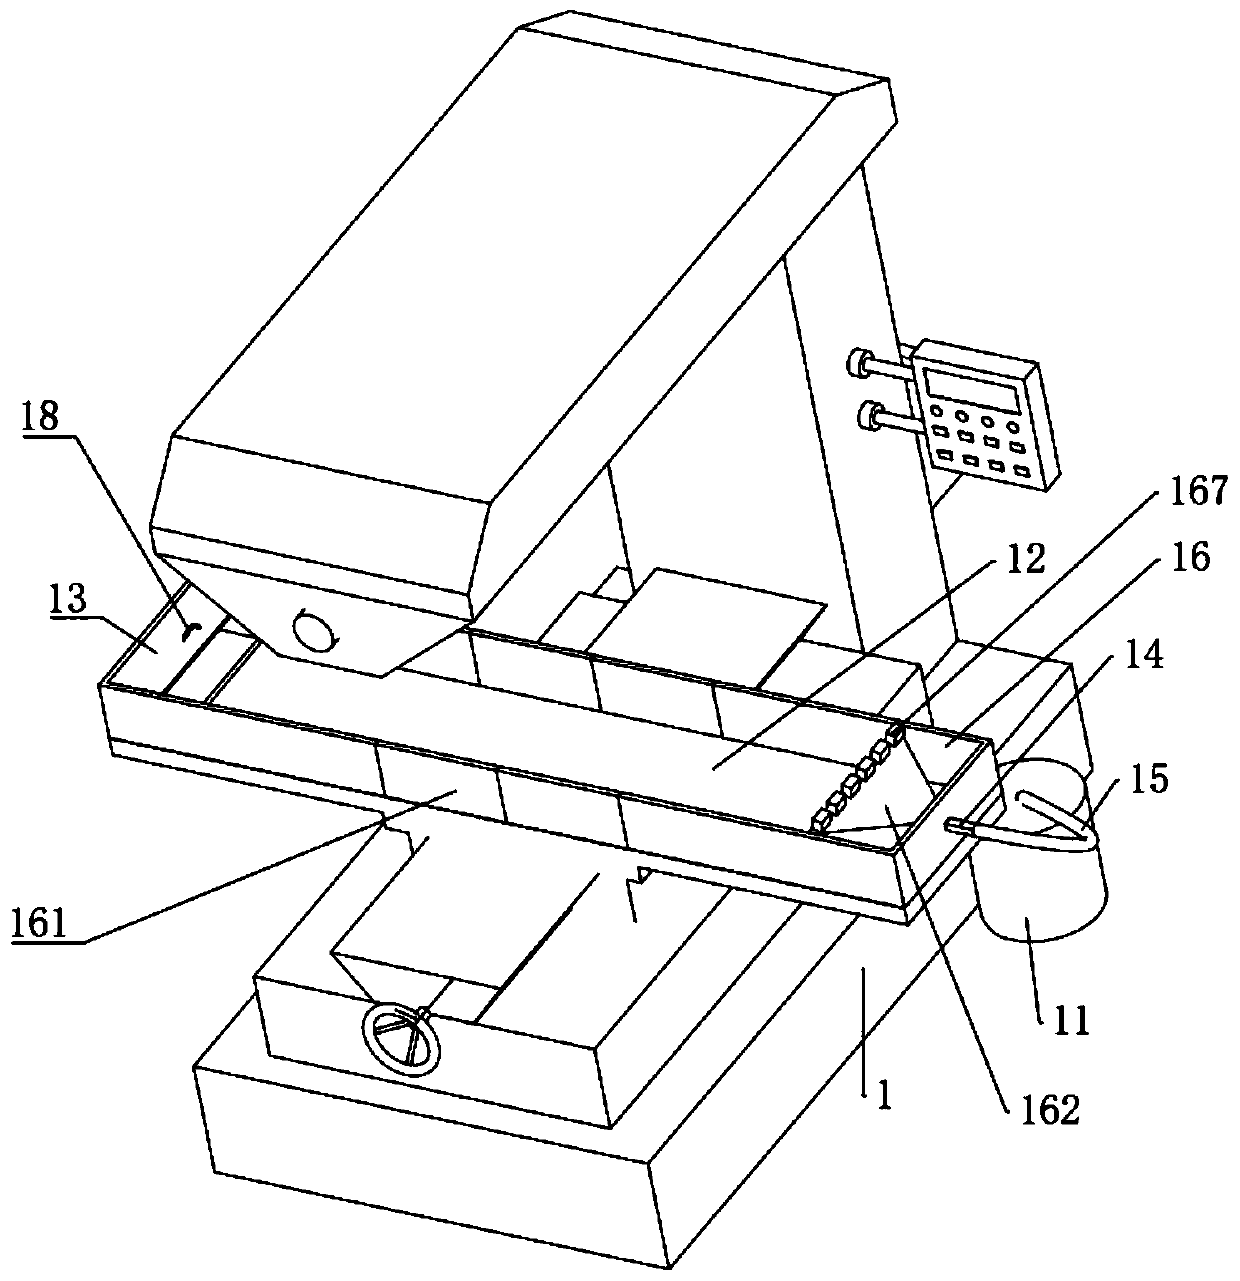 Self-cleaning device for horizontal milling machine